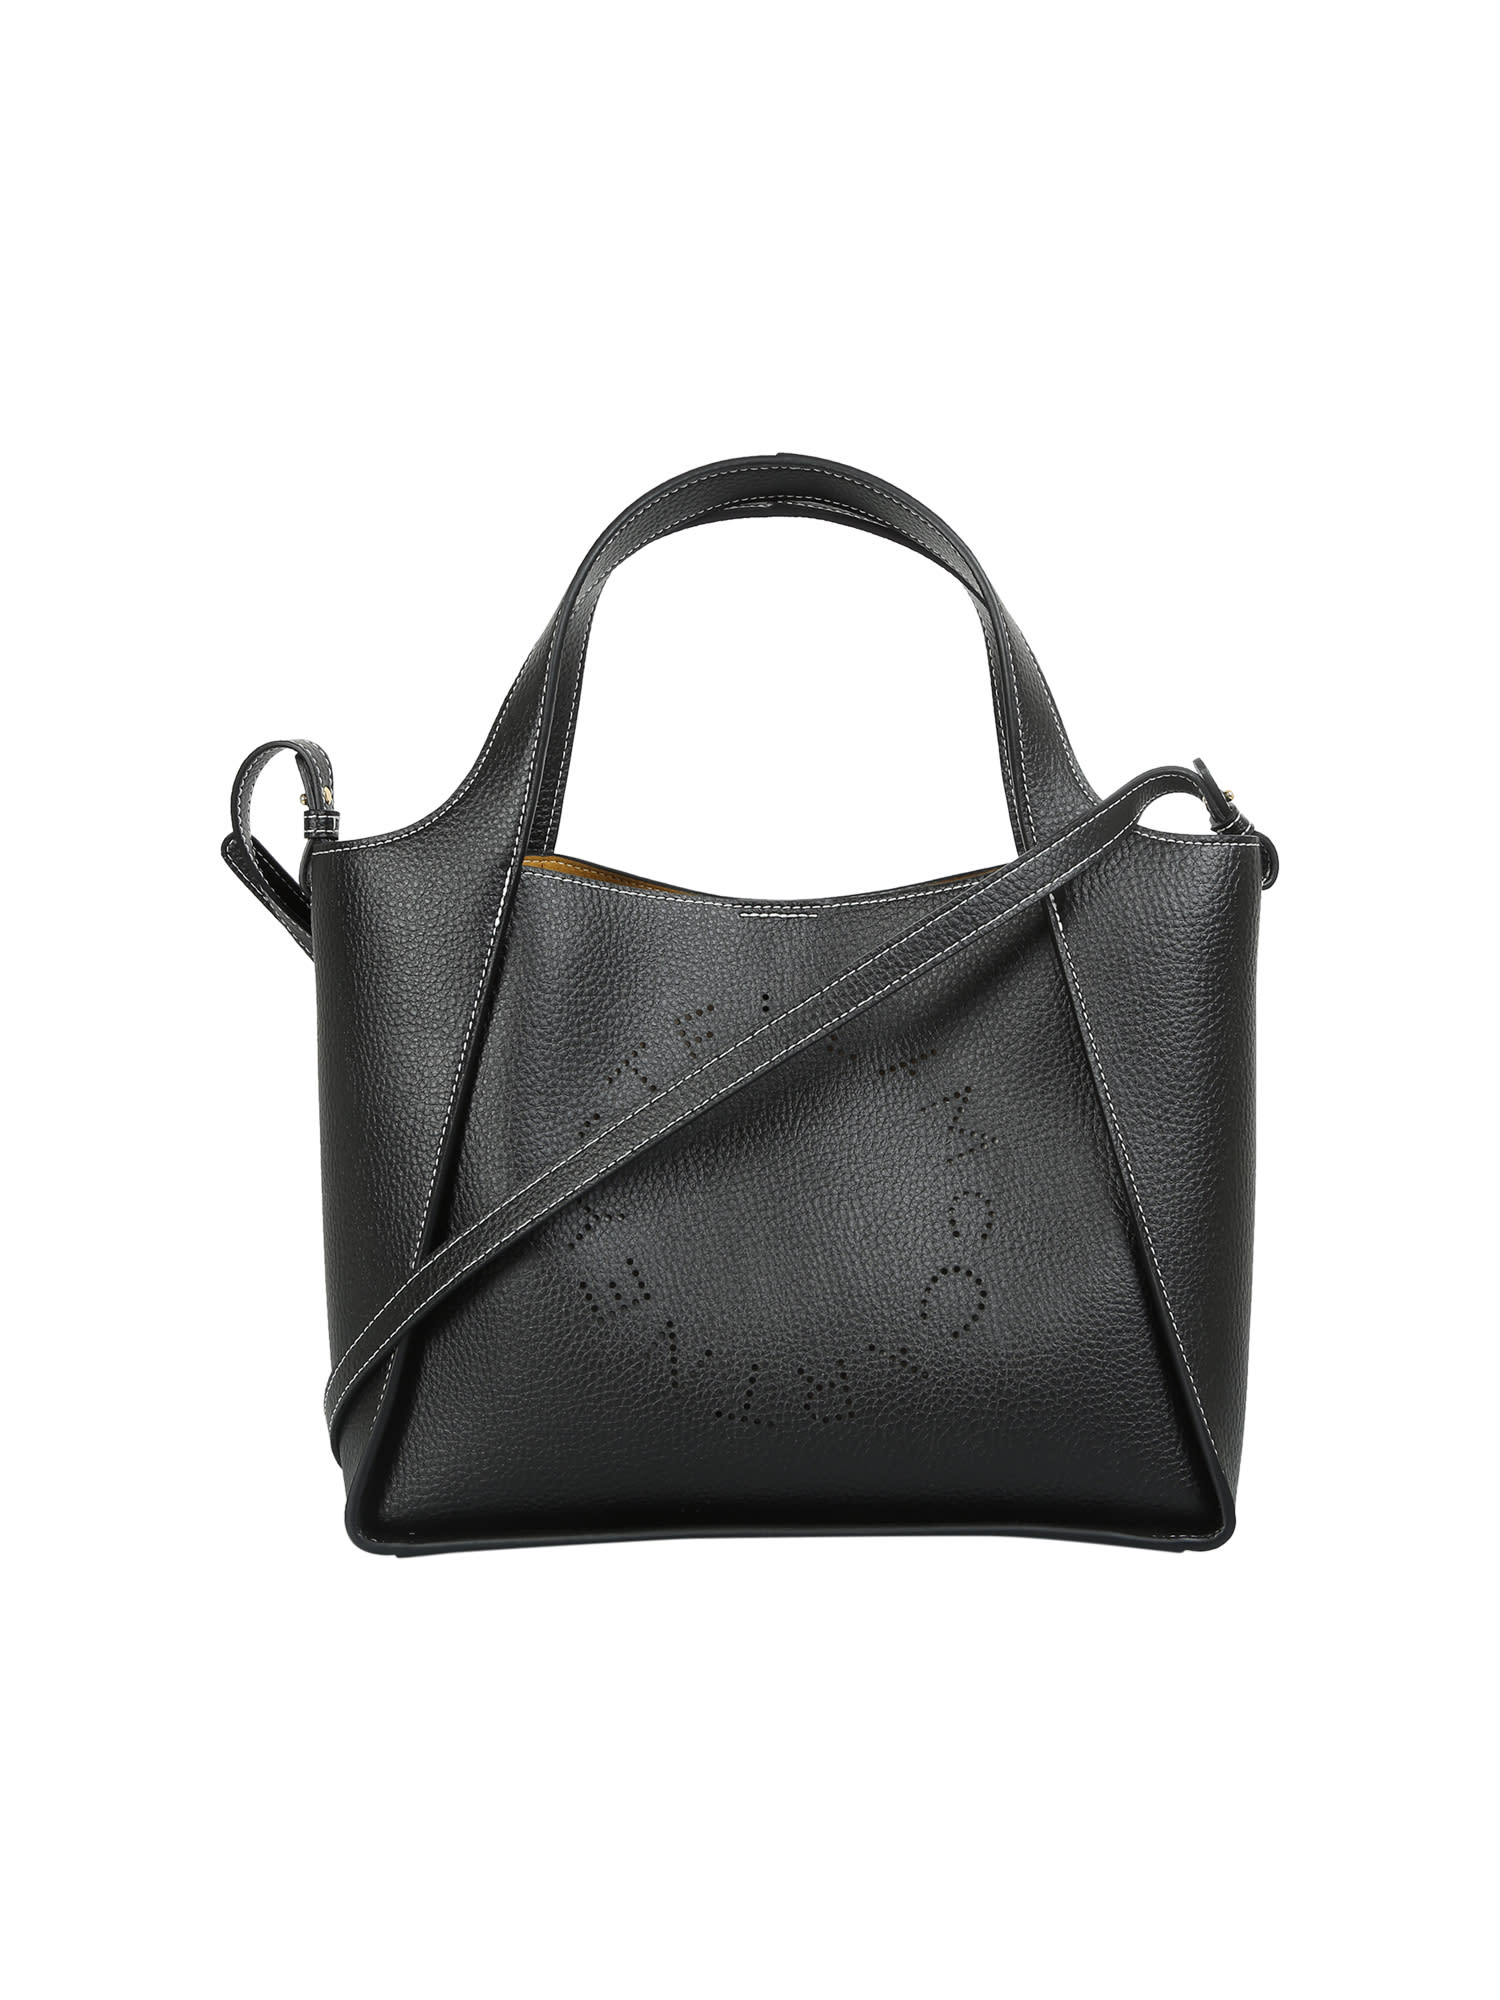 Stella Logo Tote Is A Contemporary, Practical, Casual Stella Mccartney Bag, Always Made Following The Ethics Of Sustainability